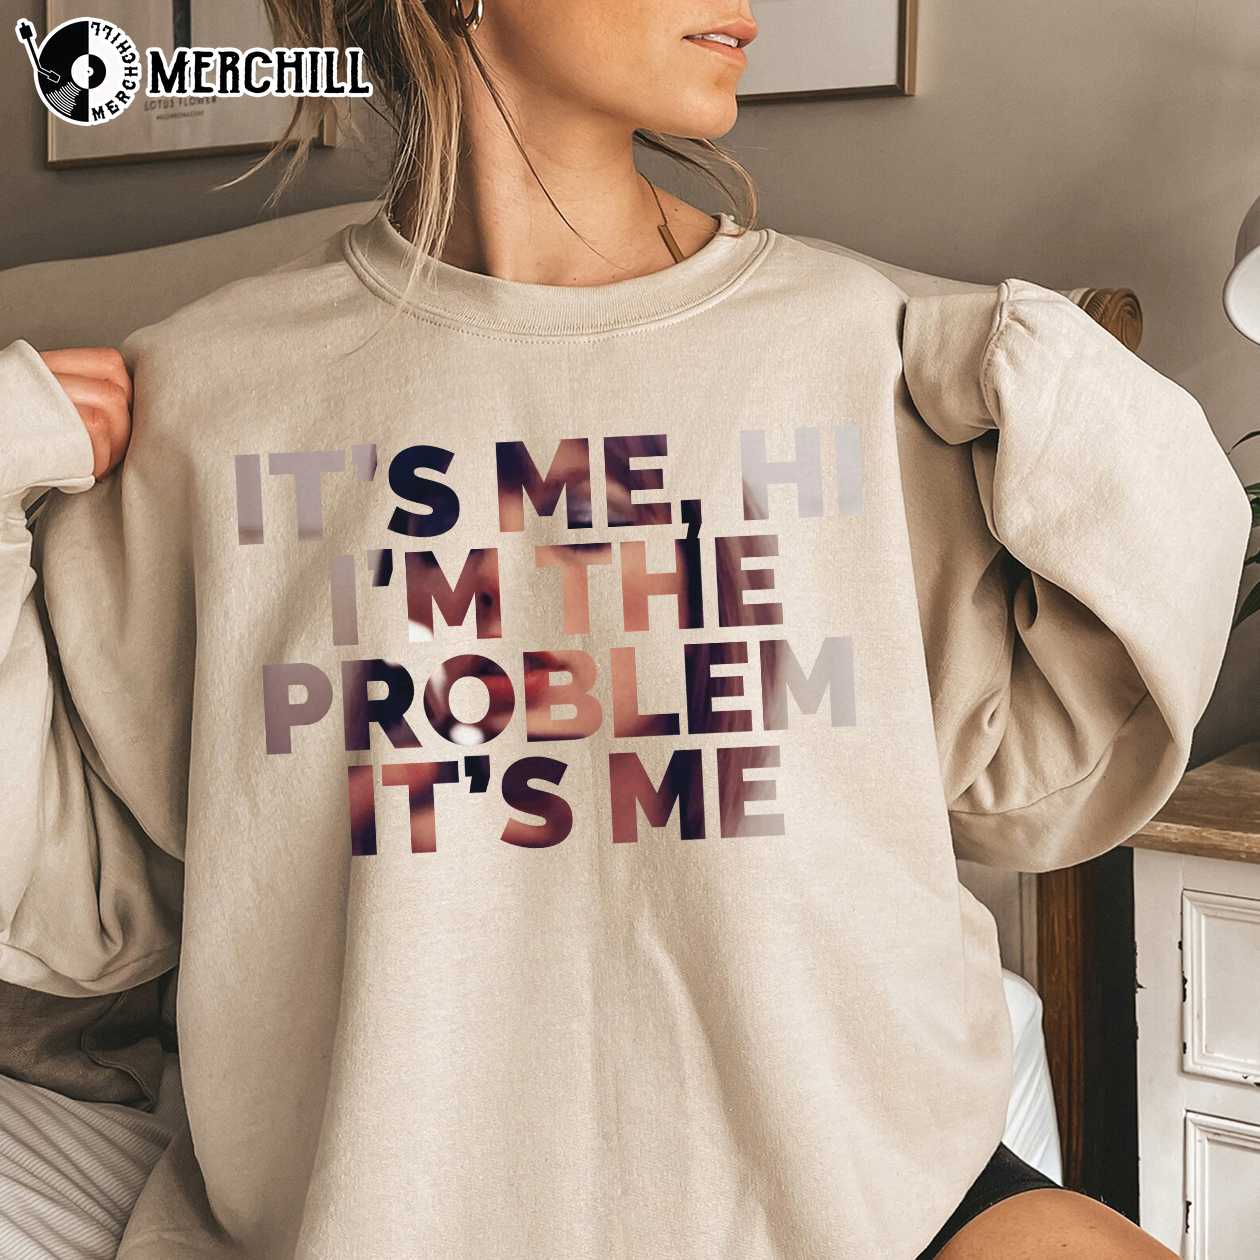 Taylor Swift Face Shirt It's Me Hi I'm the Problem It's Me Taylor Swift  Lover Gifts - Happy Place for Music Lovers